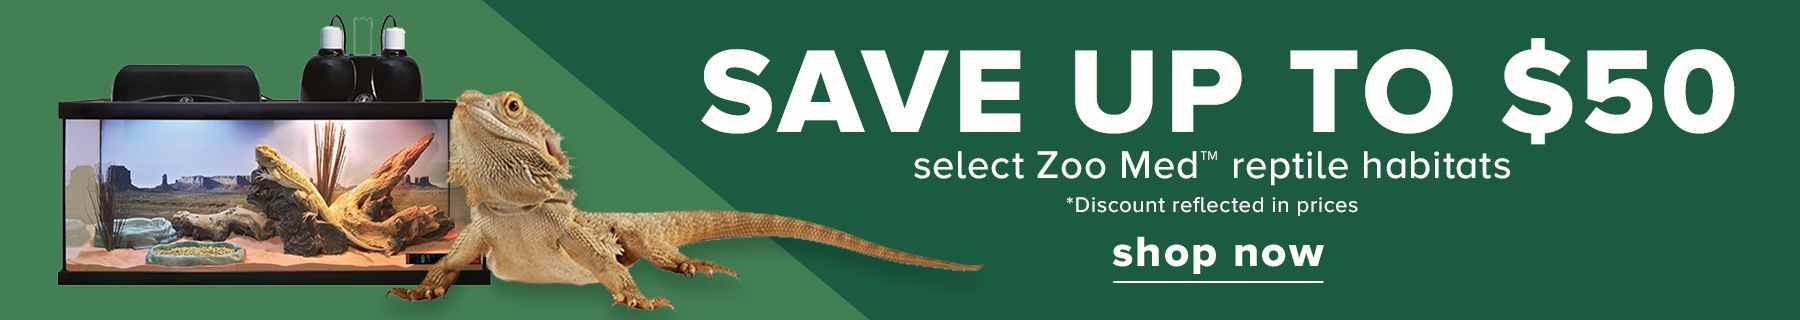 Reptile Supplies: Reptile Accessories & Products | PetSmart